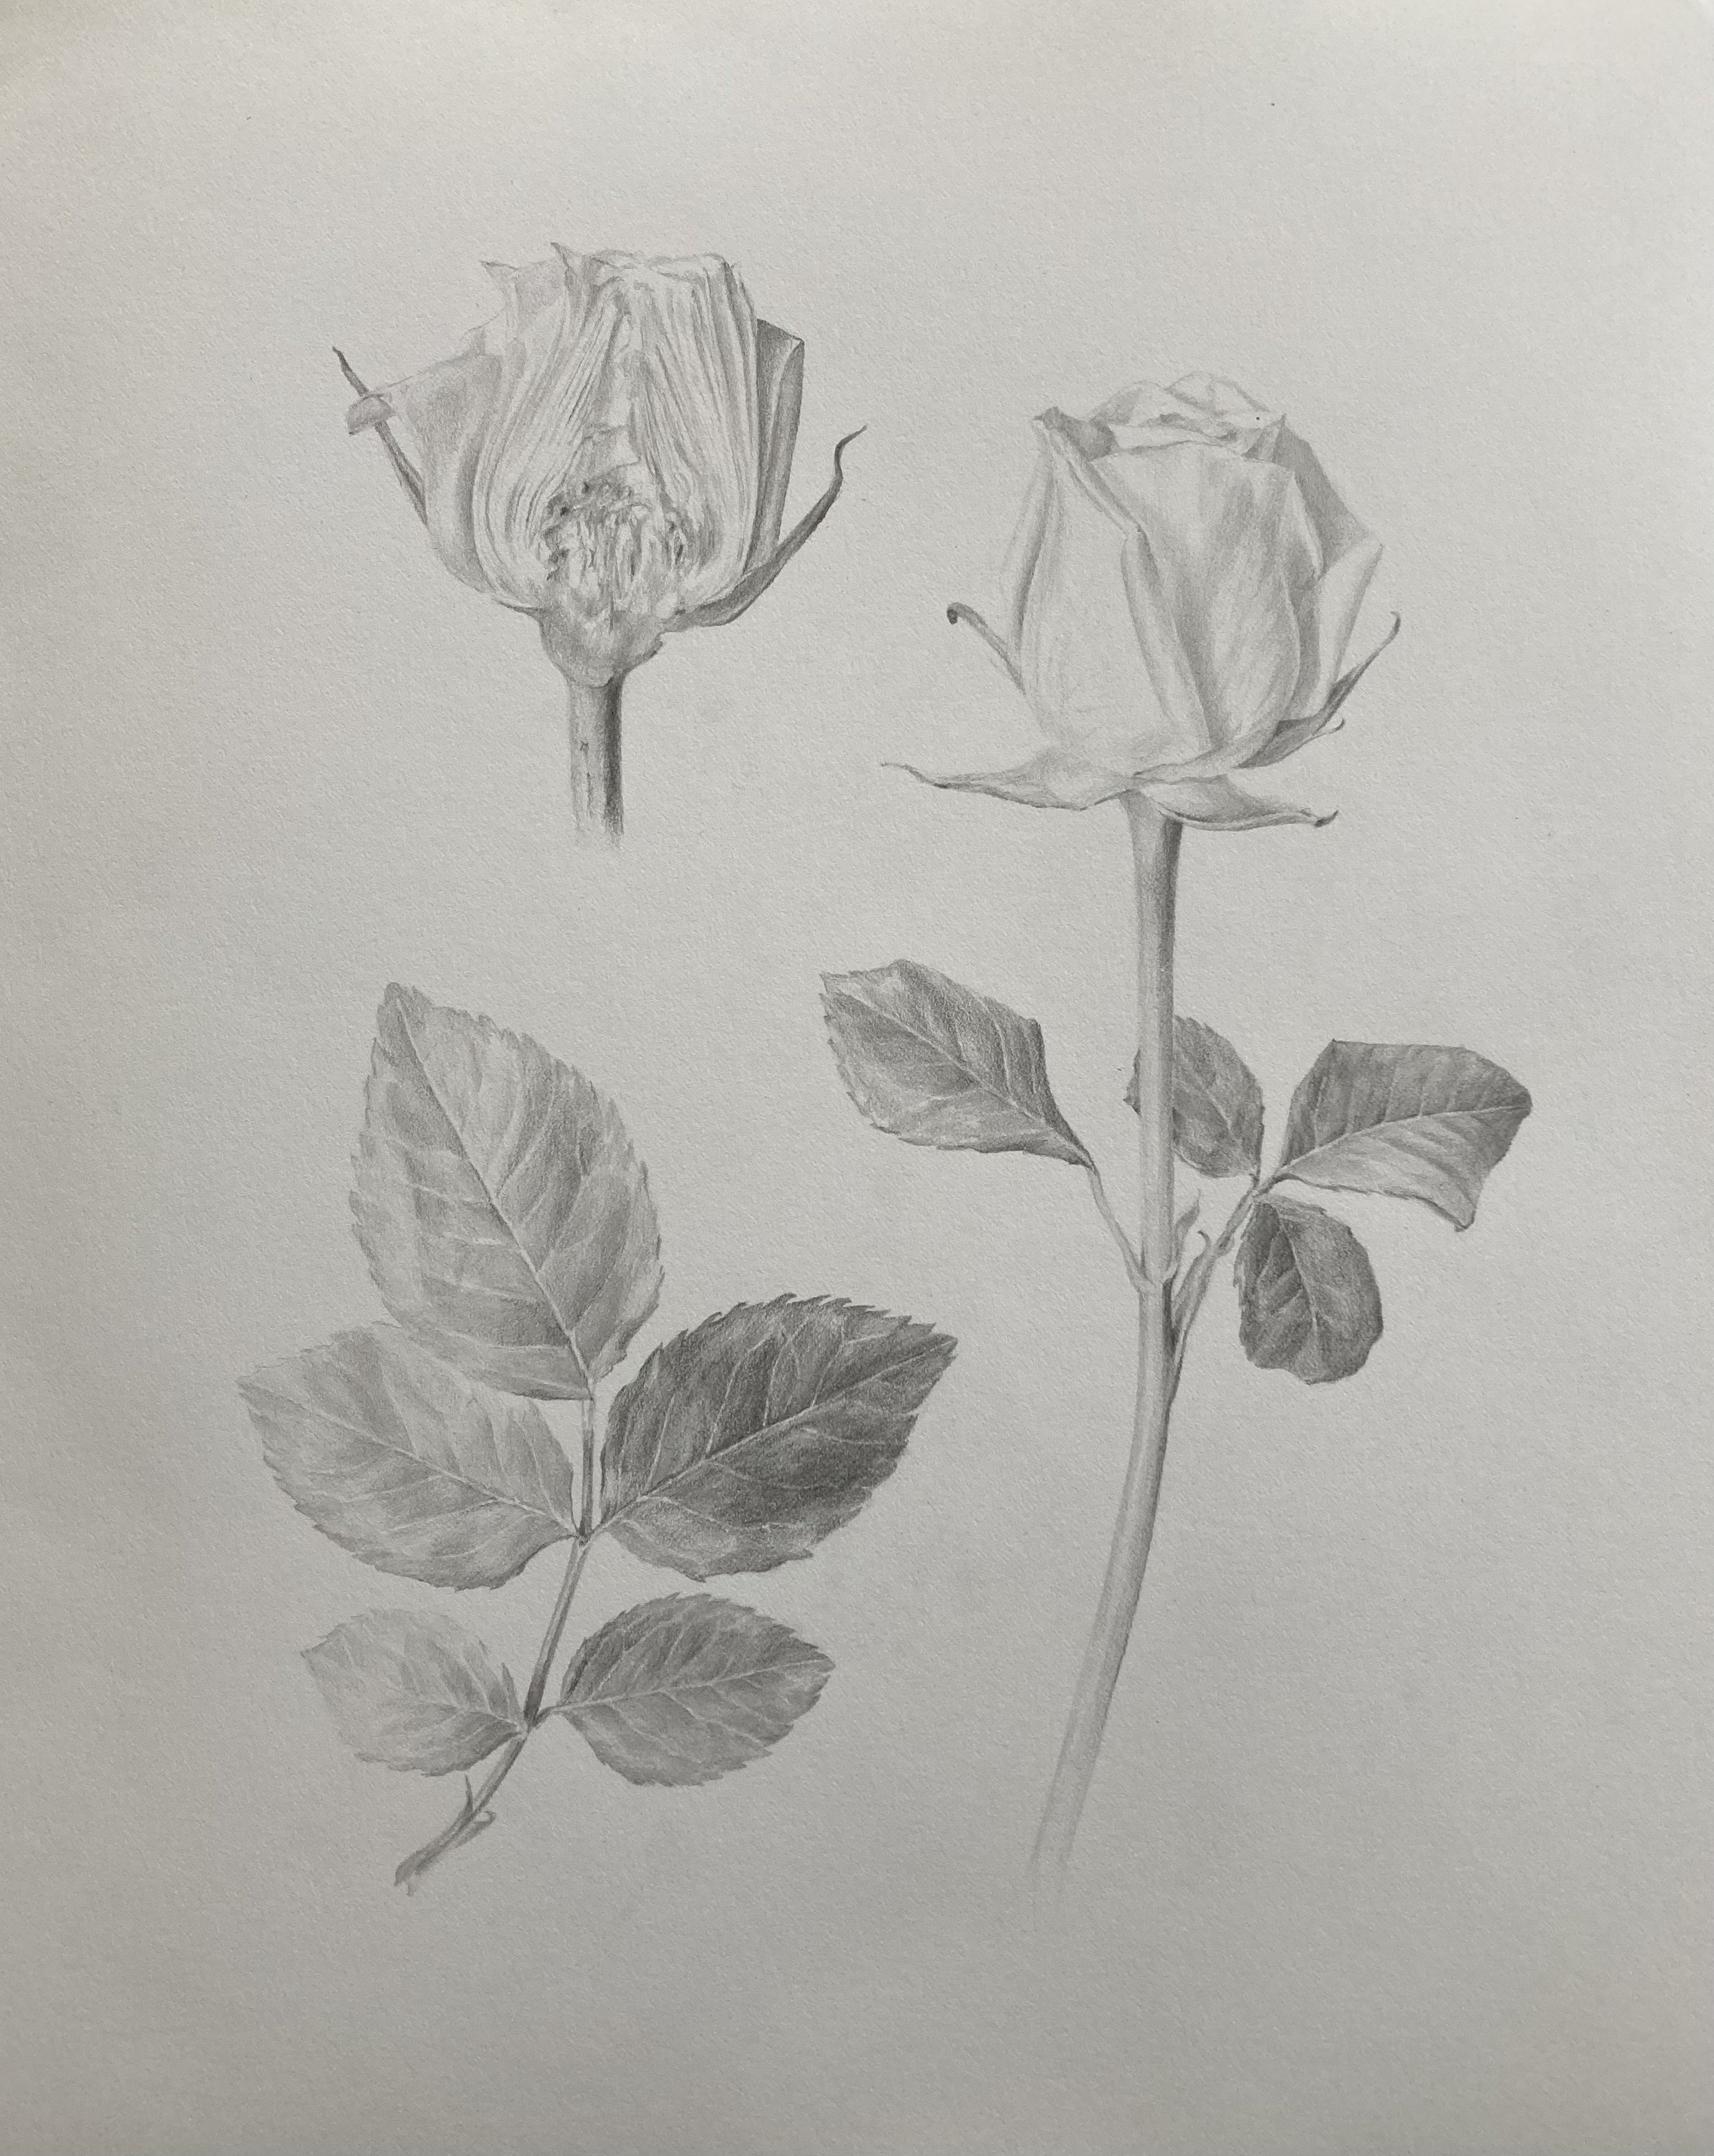   Rose   Graphite on paper  10 in x 14 in 